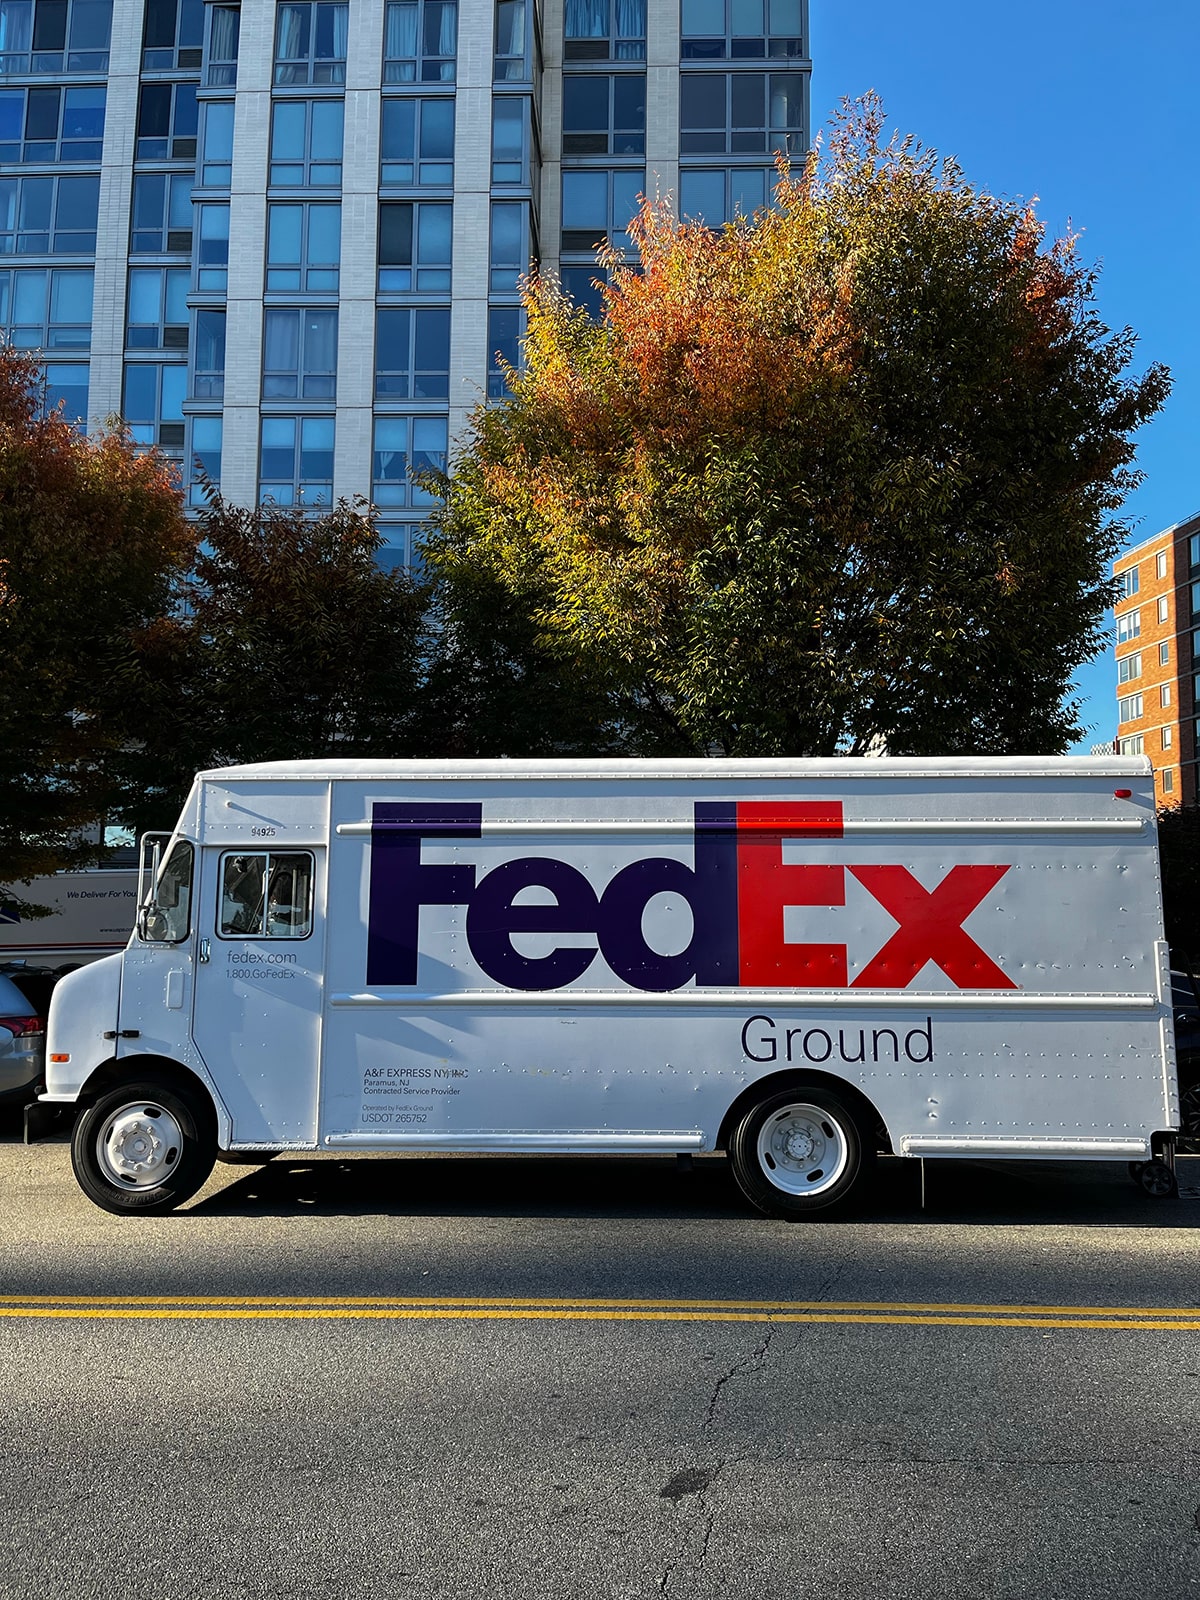 FedEx is likely to refund you for lapses in service, only if you ask for it